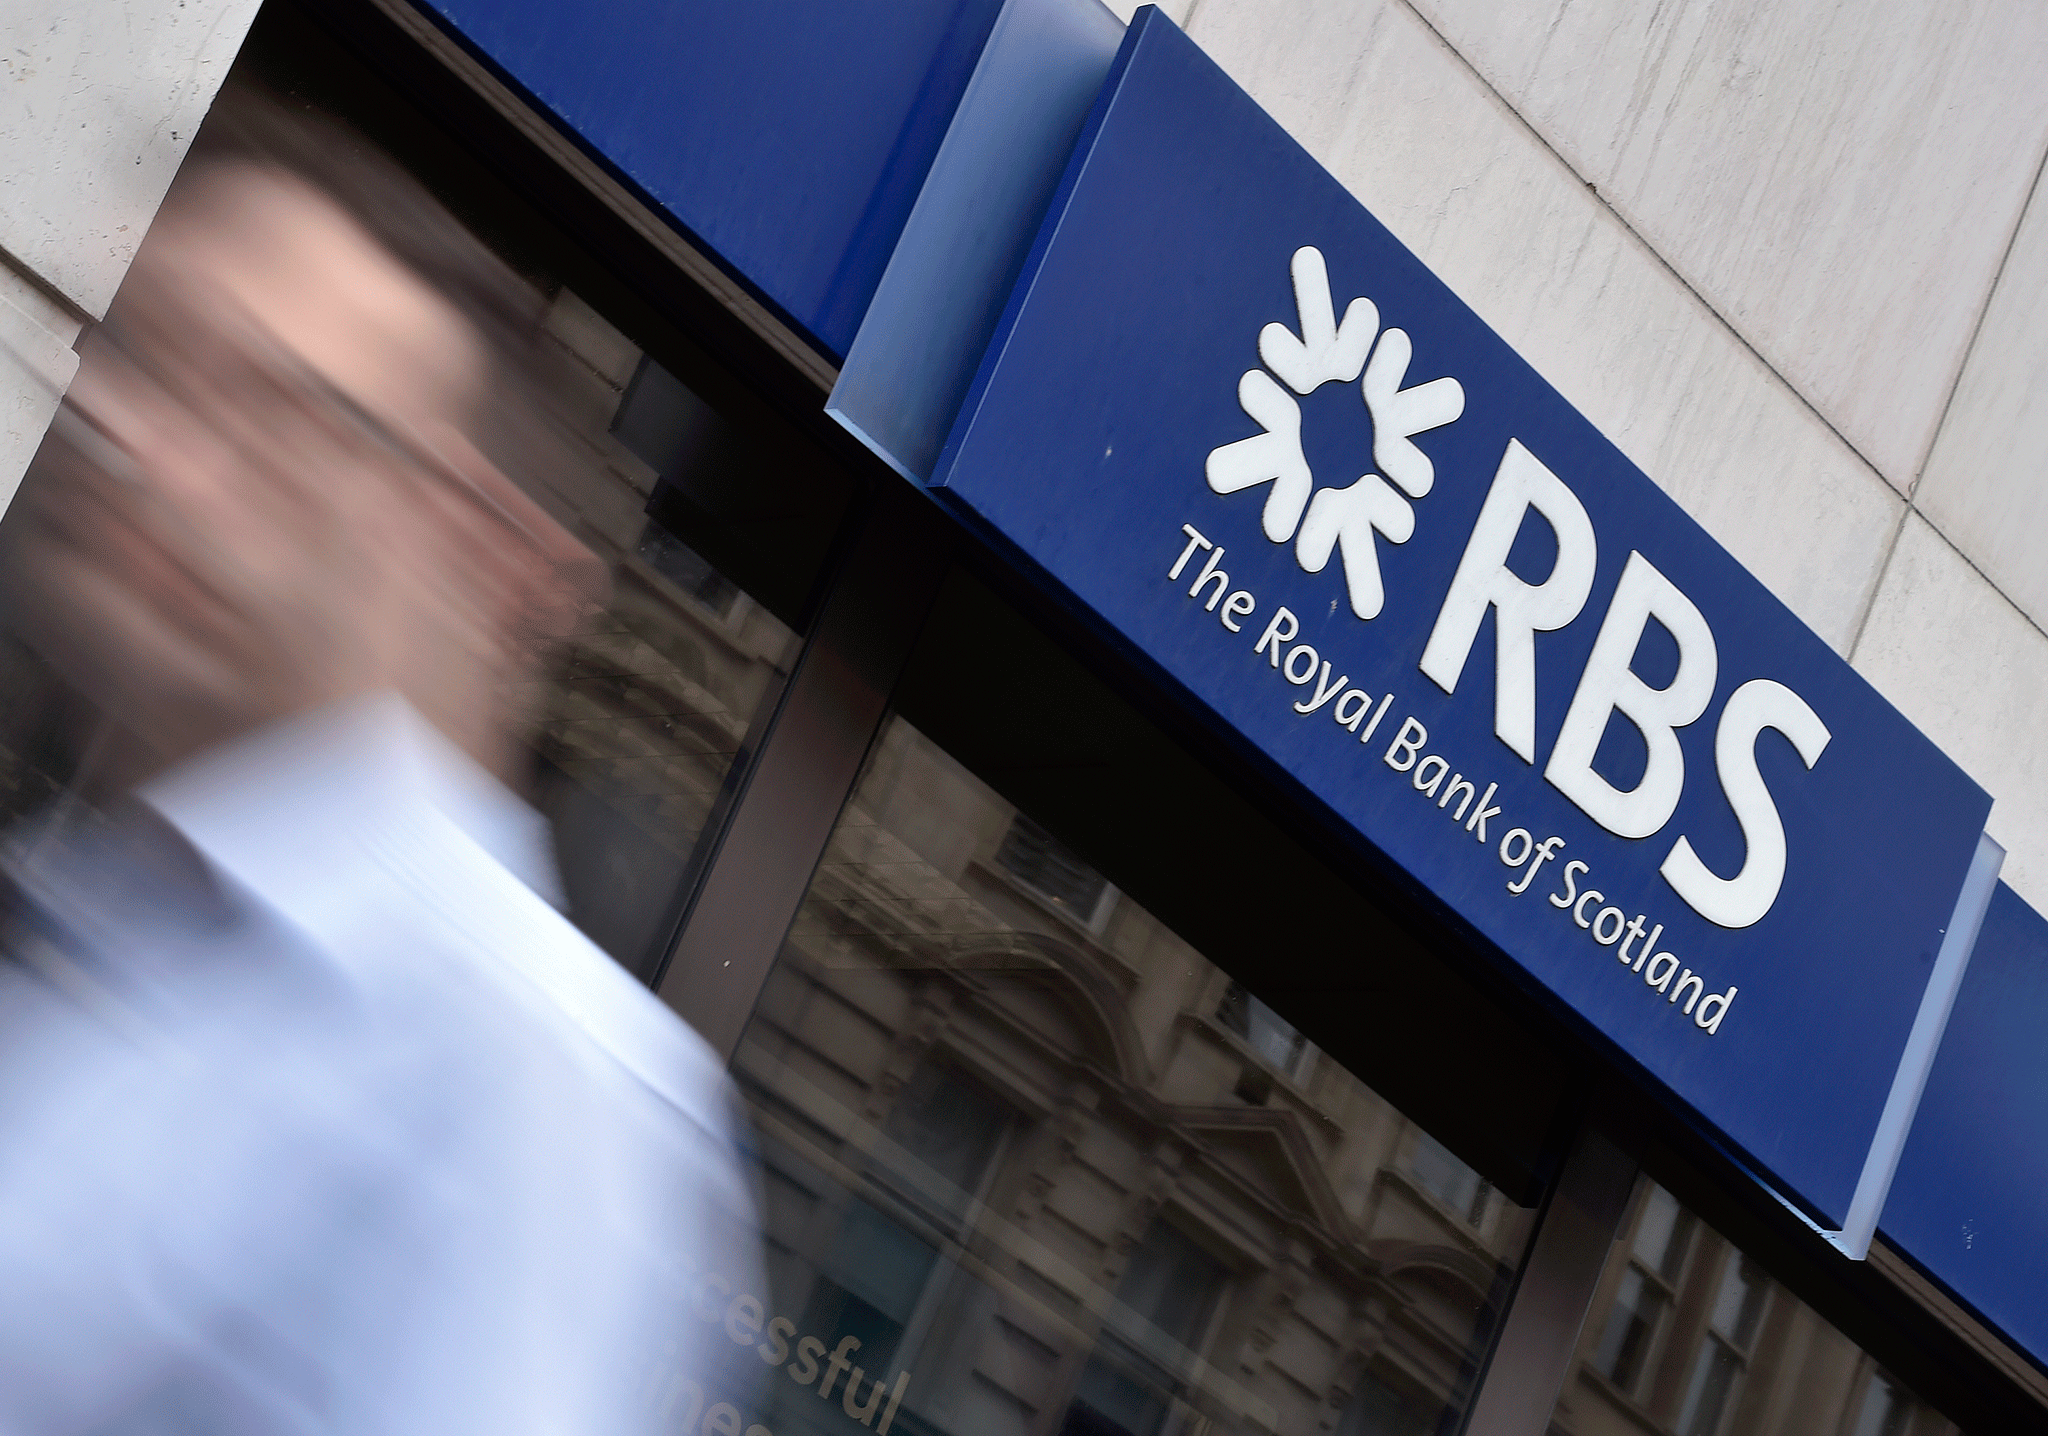 Revelations broadcast this week by the BBC allege that RBS staff were trained to forge customer signatures on contract documents